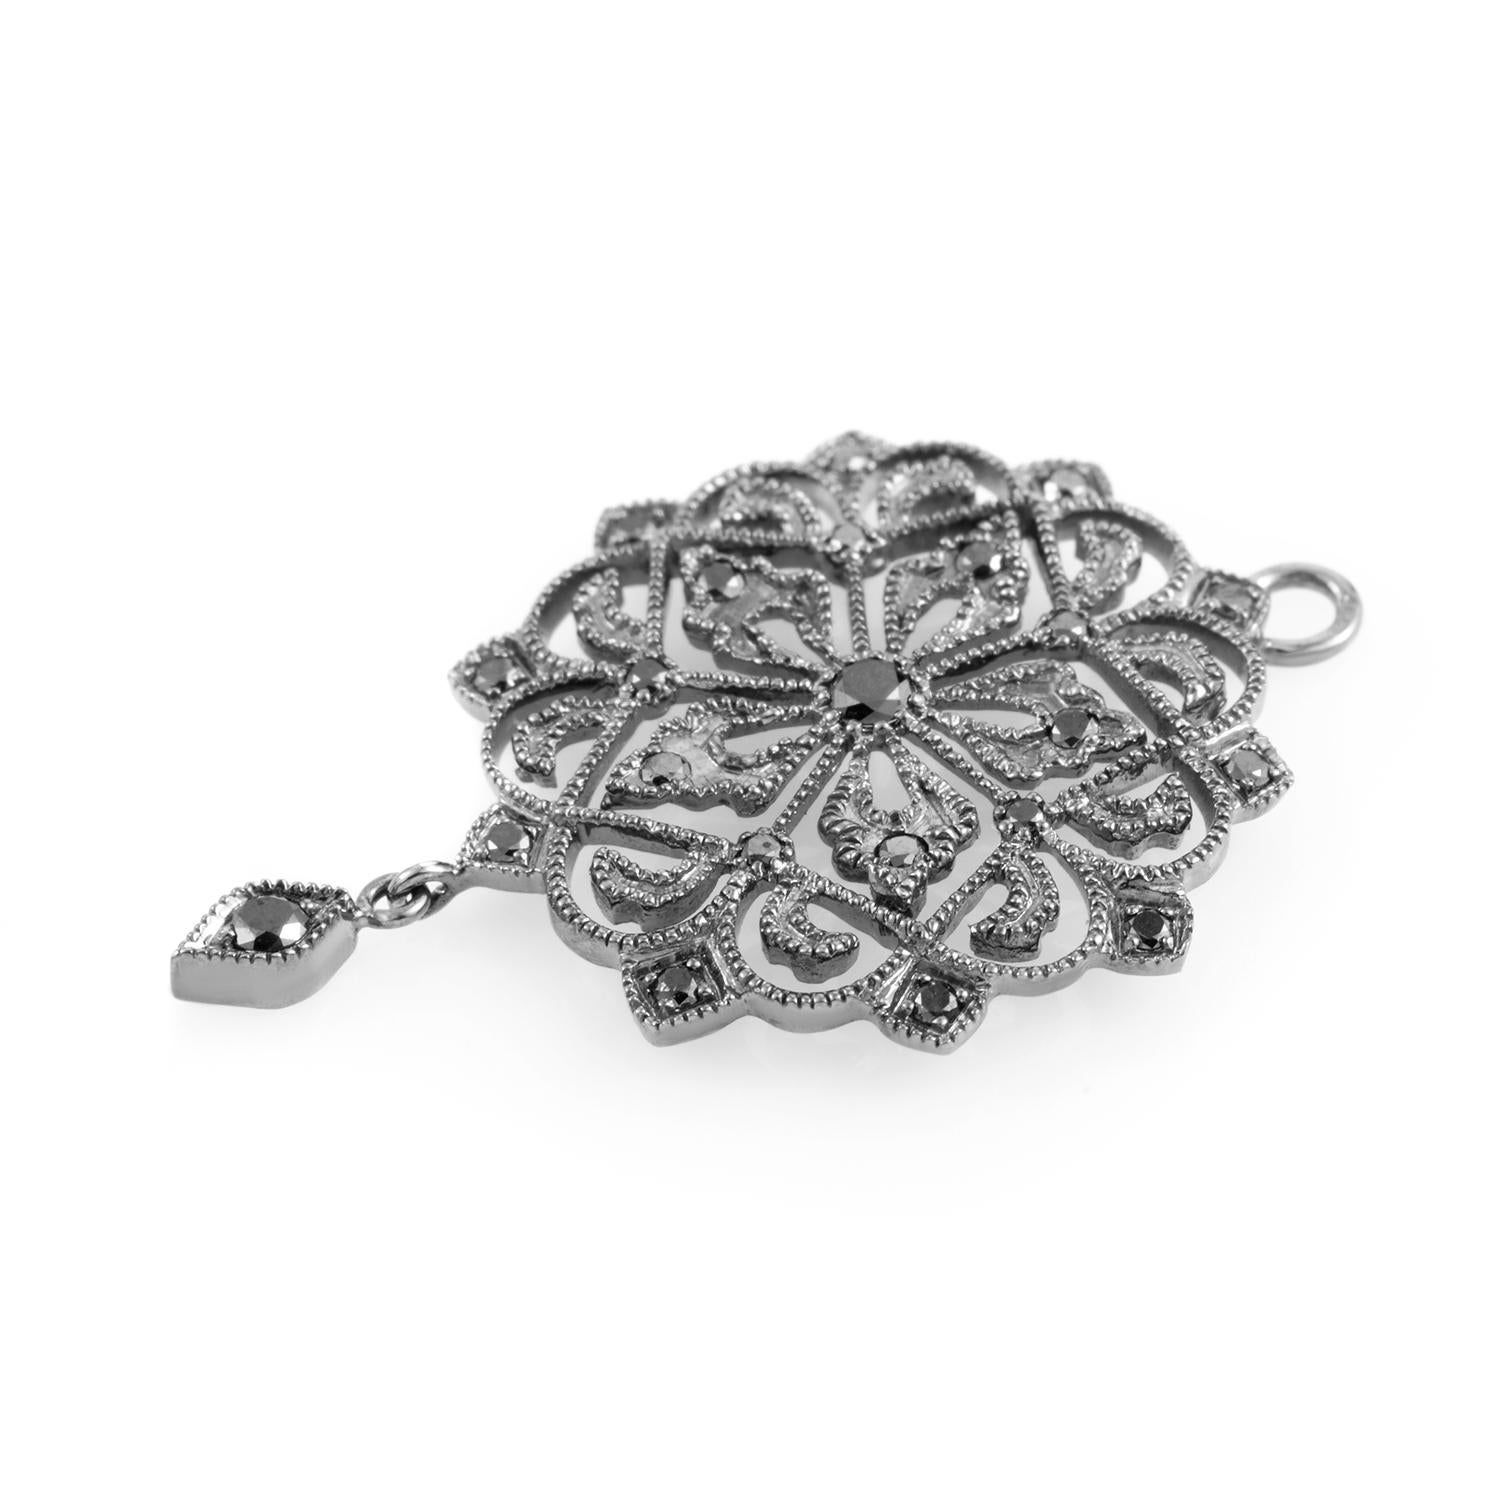 Dazzling in its sophisticated complexity and spellbinding in its magnificent artistic spirit, this exquisite pendant from Poiray assumes a stylized form of a flower, made of black rhodium-plated 18K white gold and adorned with stunning black